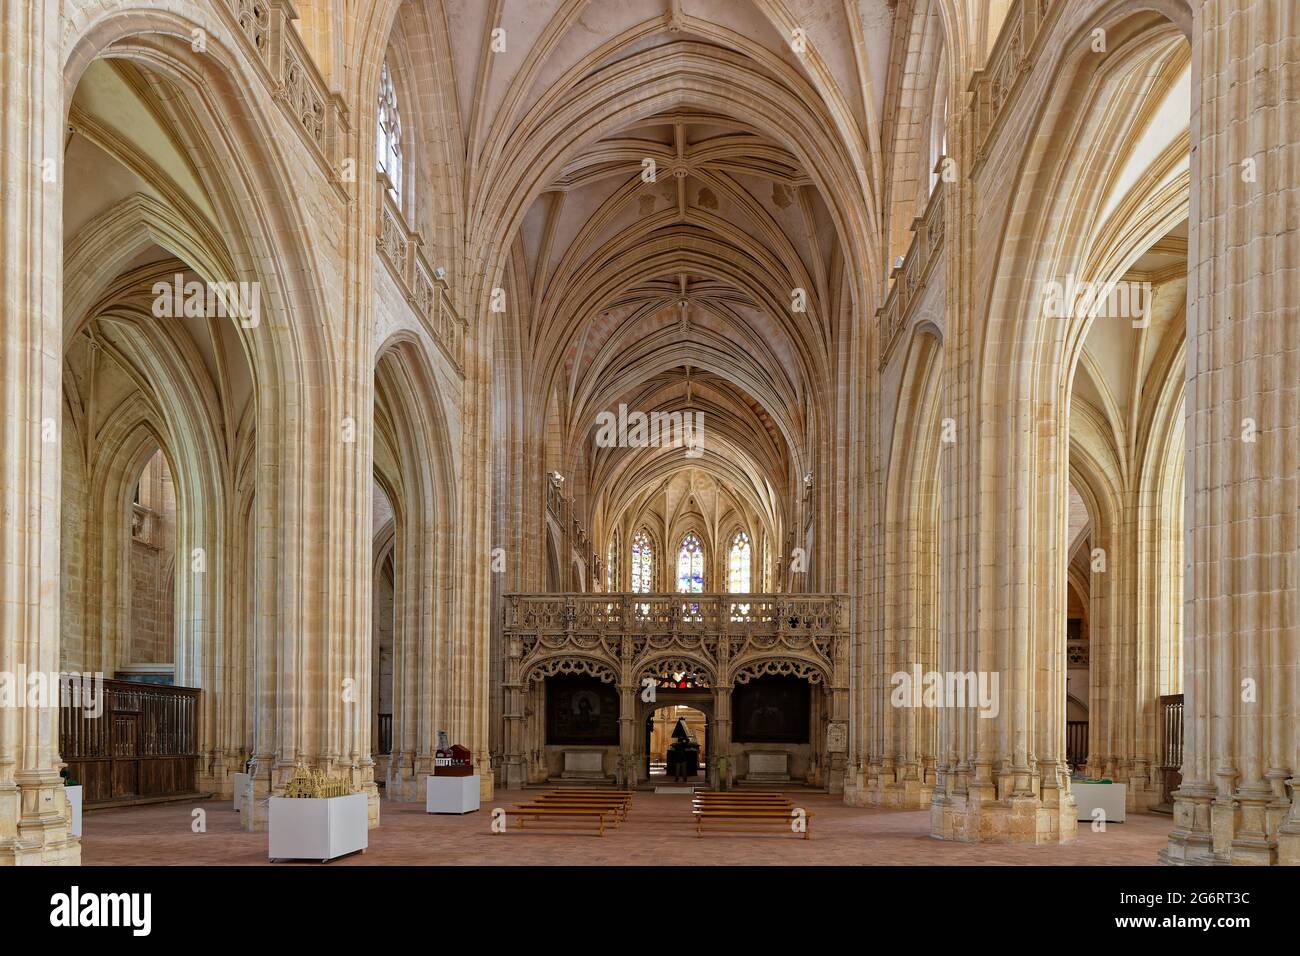 BOURG-EN-BRESSE, FRANCE, June 29, 2021 : Gothic interior of Brou Royal Monastery church Stock Photo